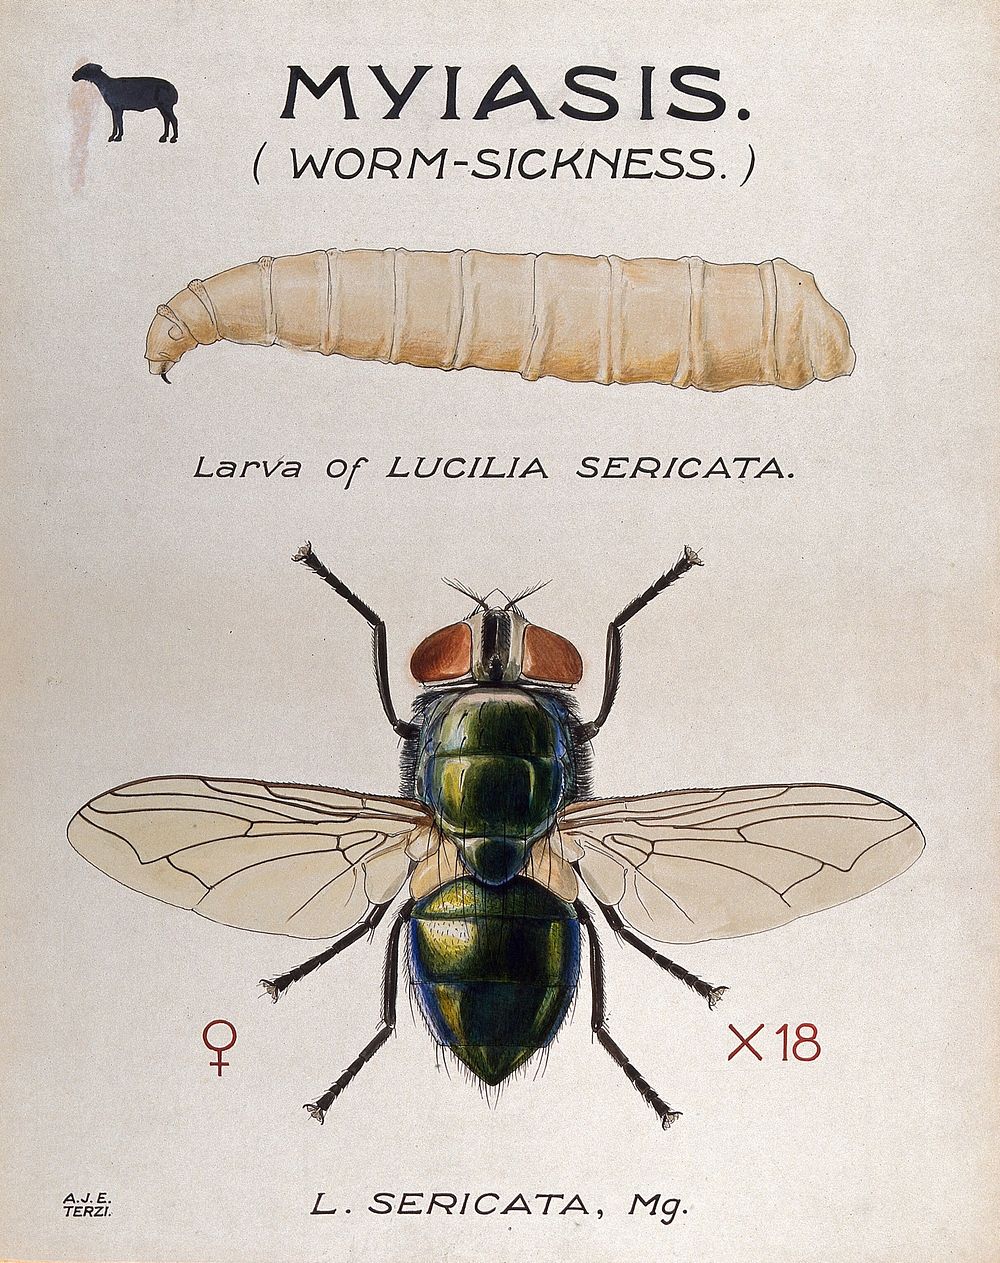 The larva and fly of a greenbottle (Lucilia sericata). Coloured drawing by A.J.E. Terzi.